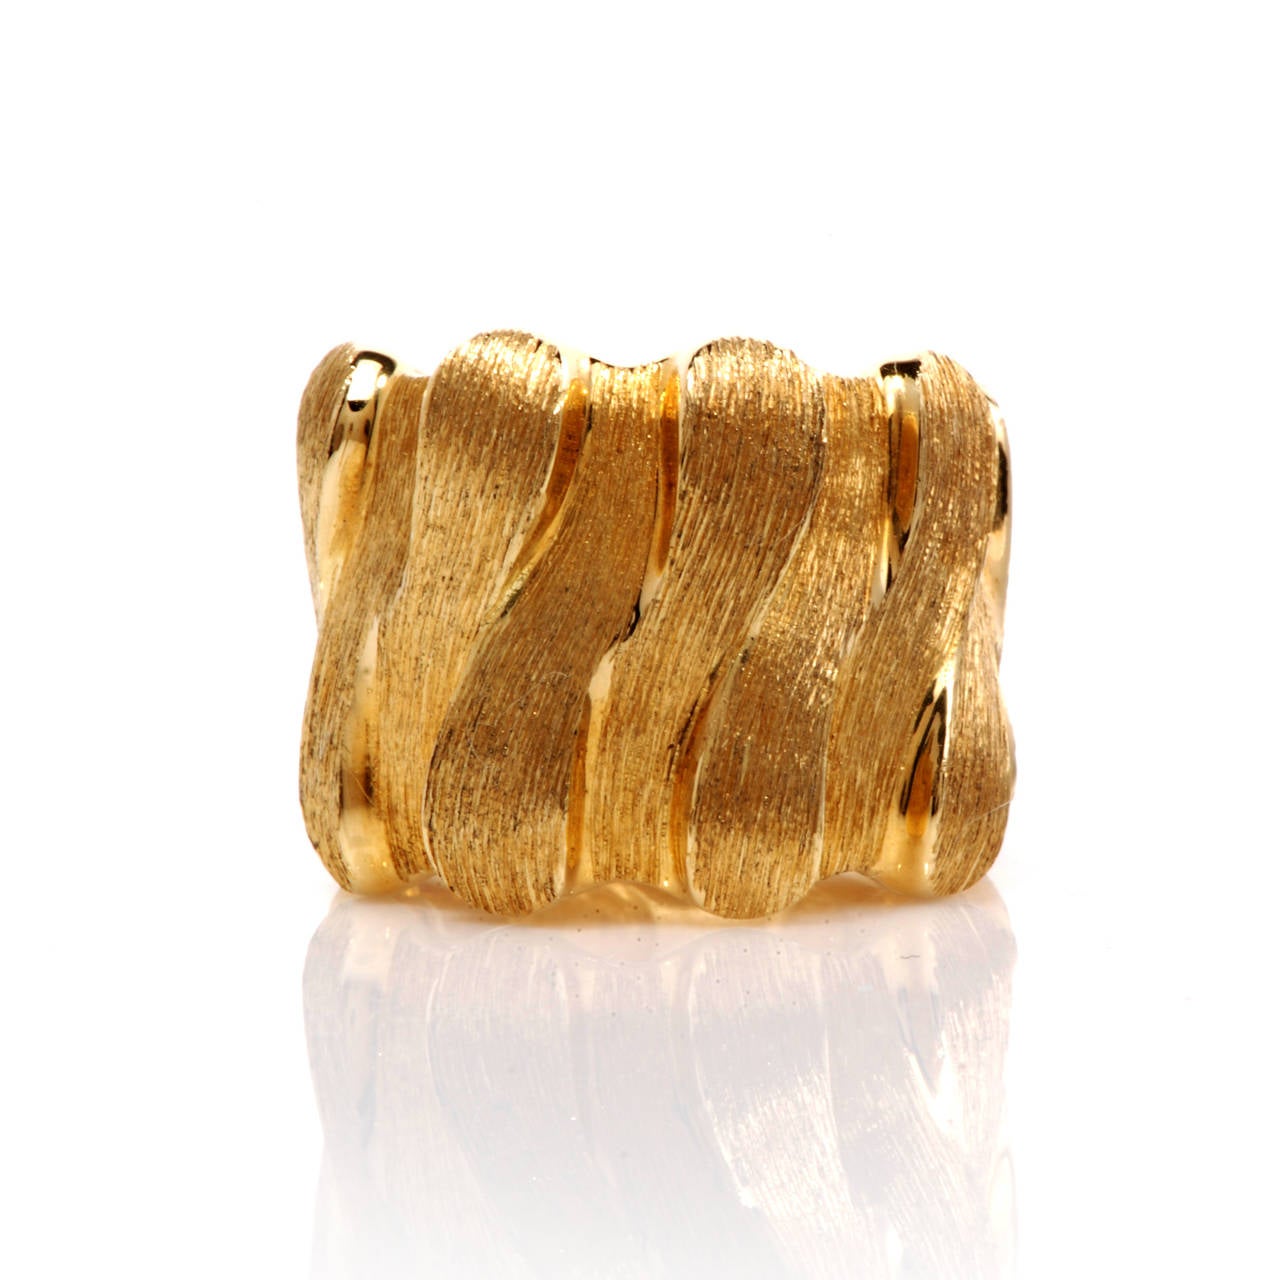 This stunning, 100% authentic saby Henry Dunay band ring is crafted in solid 18K gold. This ring is beautifully textured with a lovely overlapped style pattern design. This ring is signed and numbered and remains in NEW

Weight is approx: 16.0